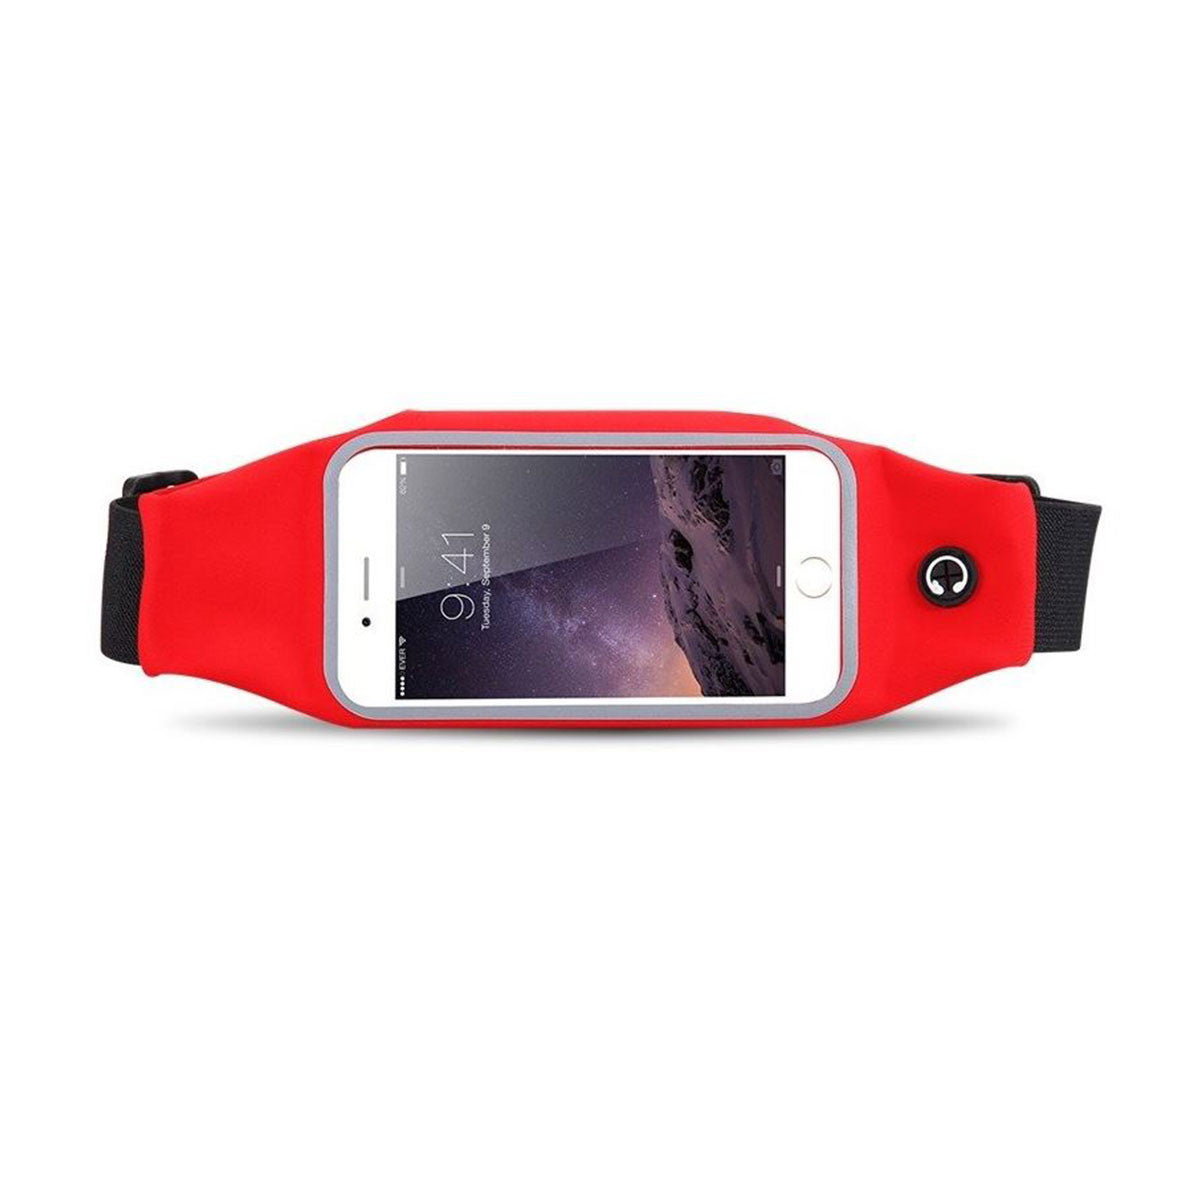 Gym Running Belt Waist Band Pouch Bum Bag For Apple iPhone X 8 7 6 6s Scorch Red  